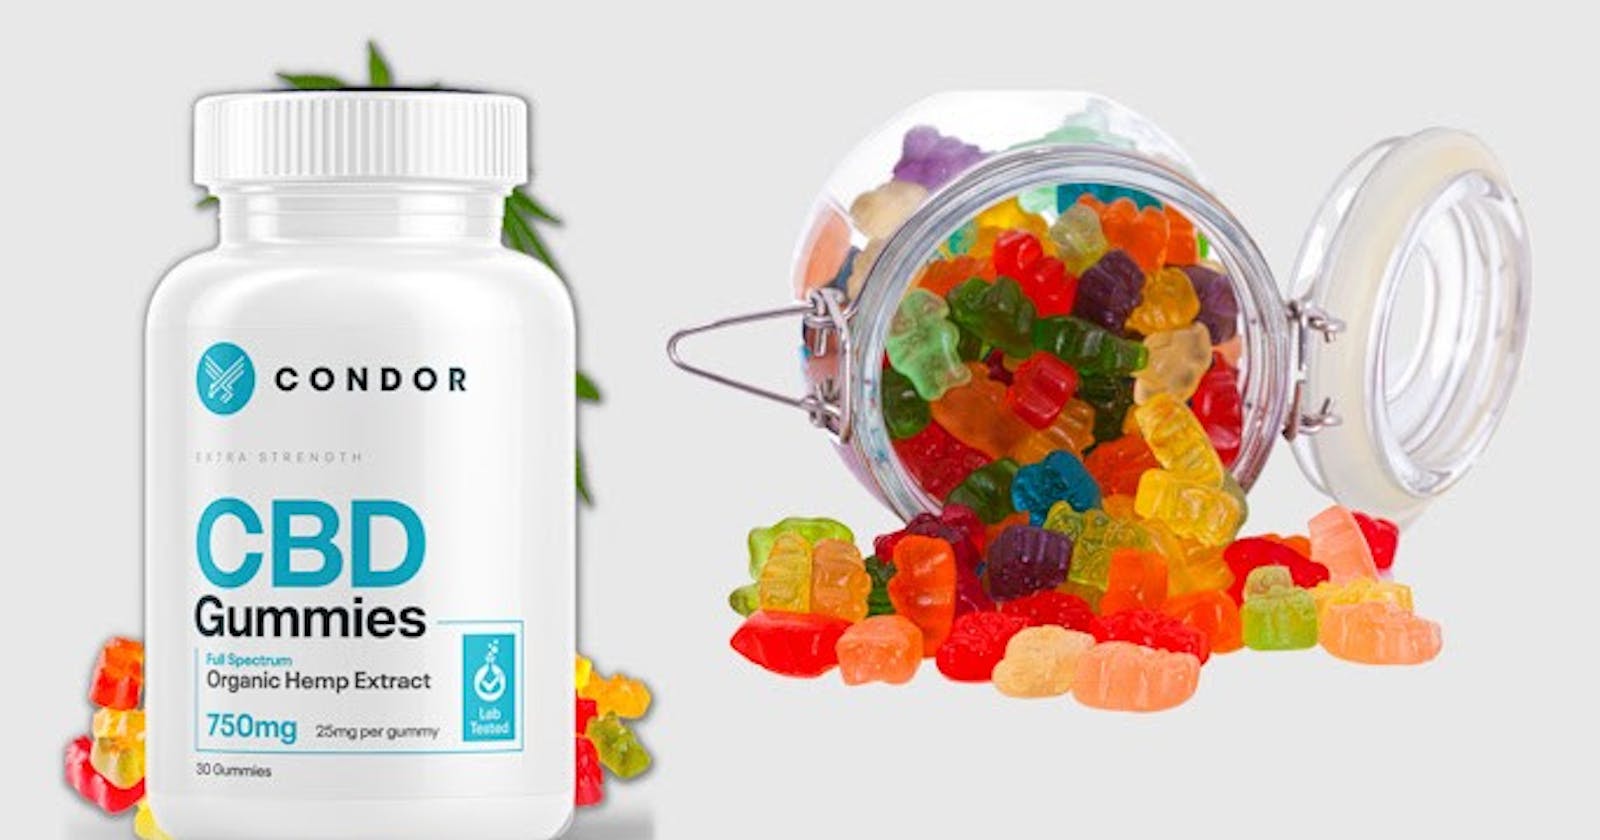 Upgrade your intimacy game with Condor's CBD Gummies for ED!